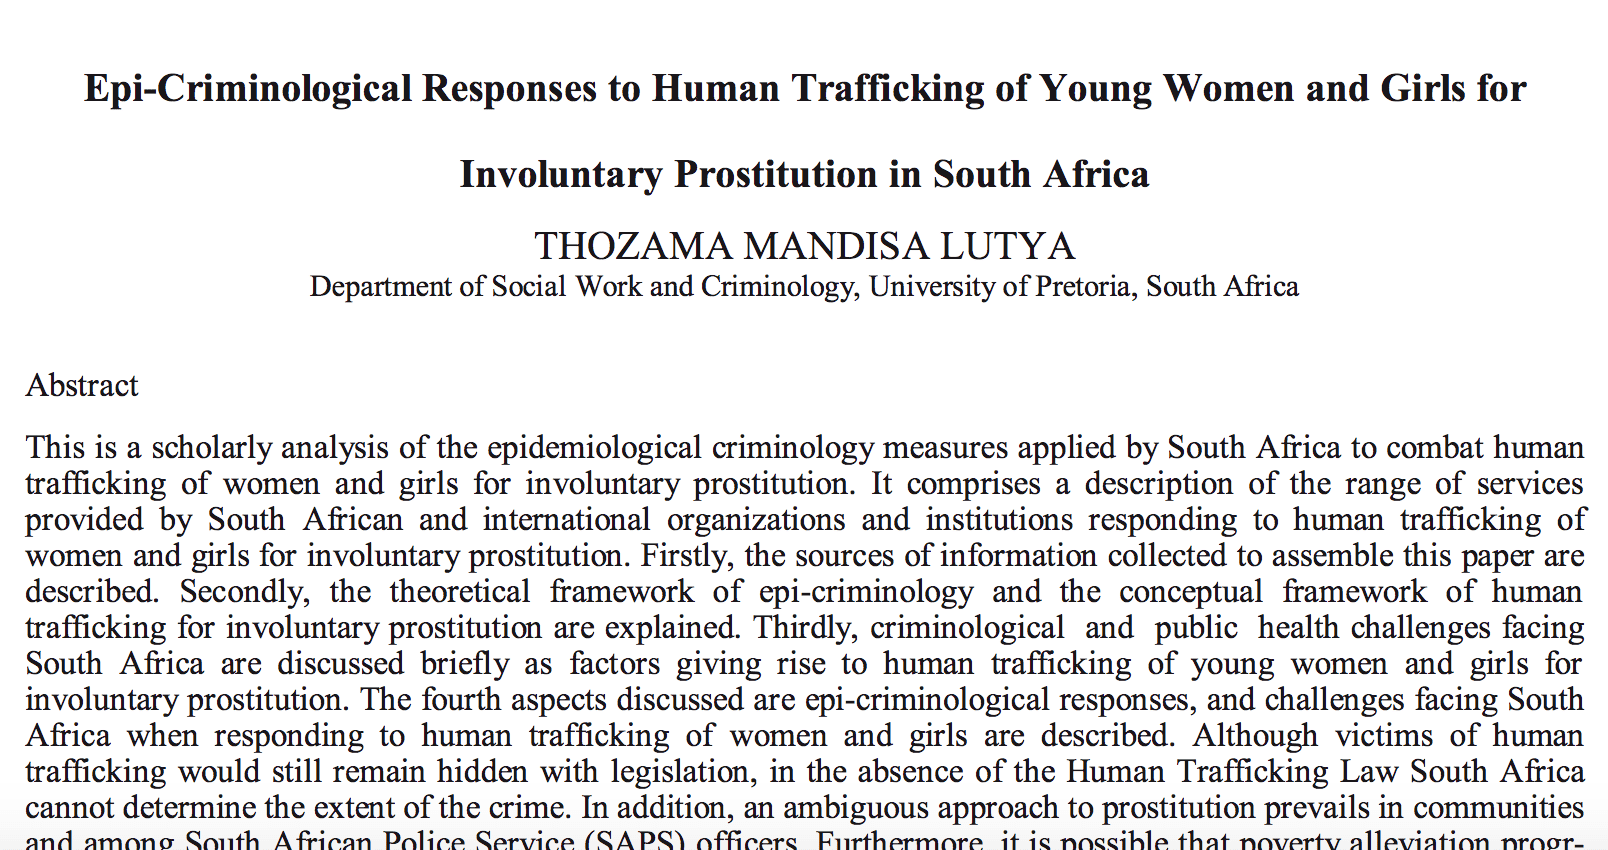 Epi-Criminological Response to Human Trafficking of Young Women and Girls for Involuntary Prostitution in South Africa